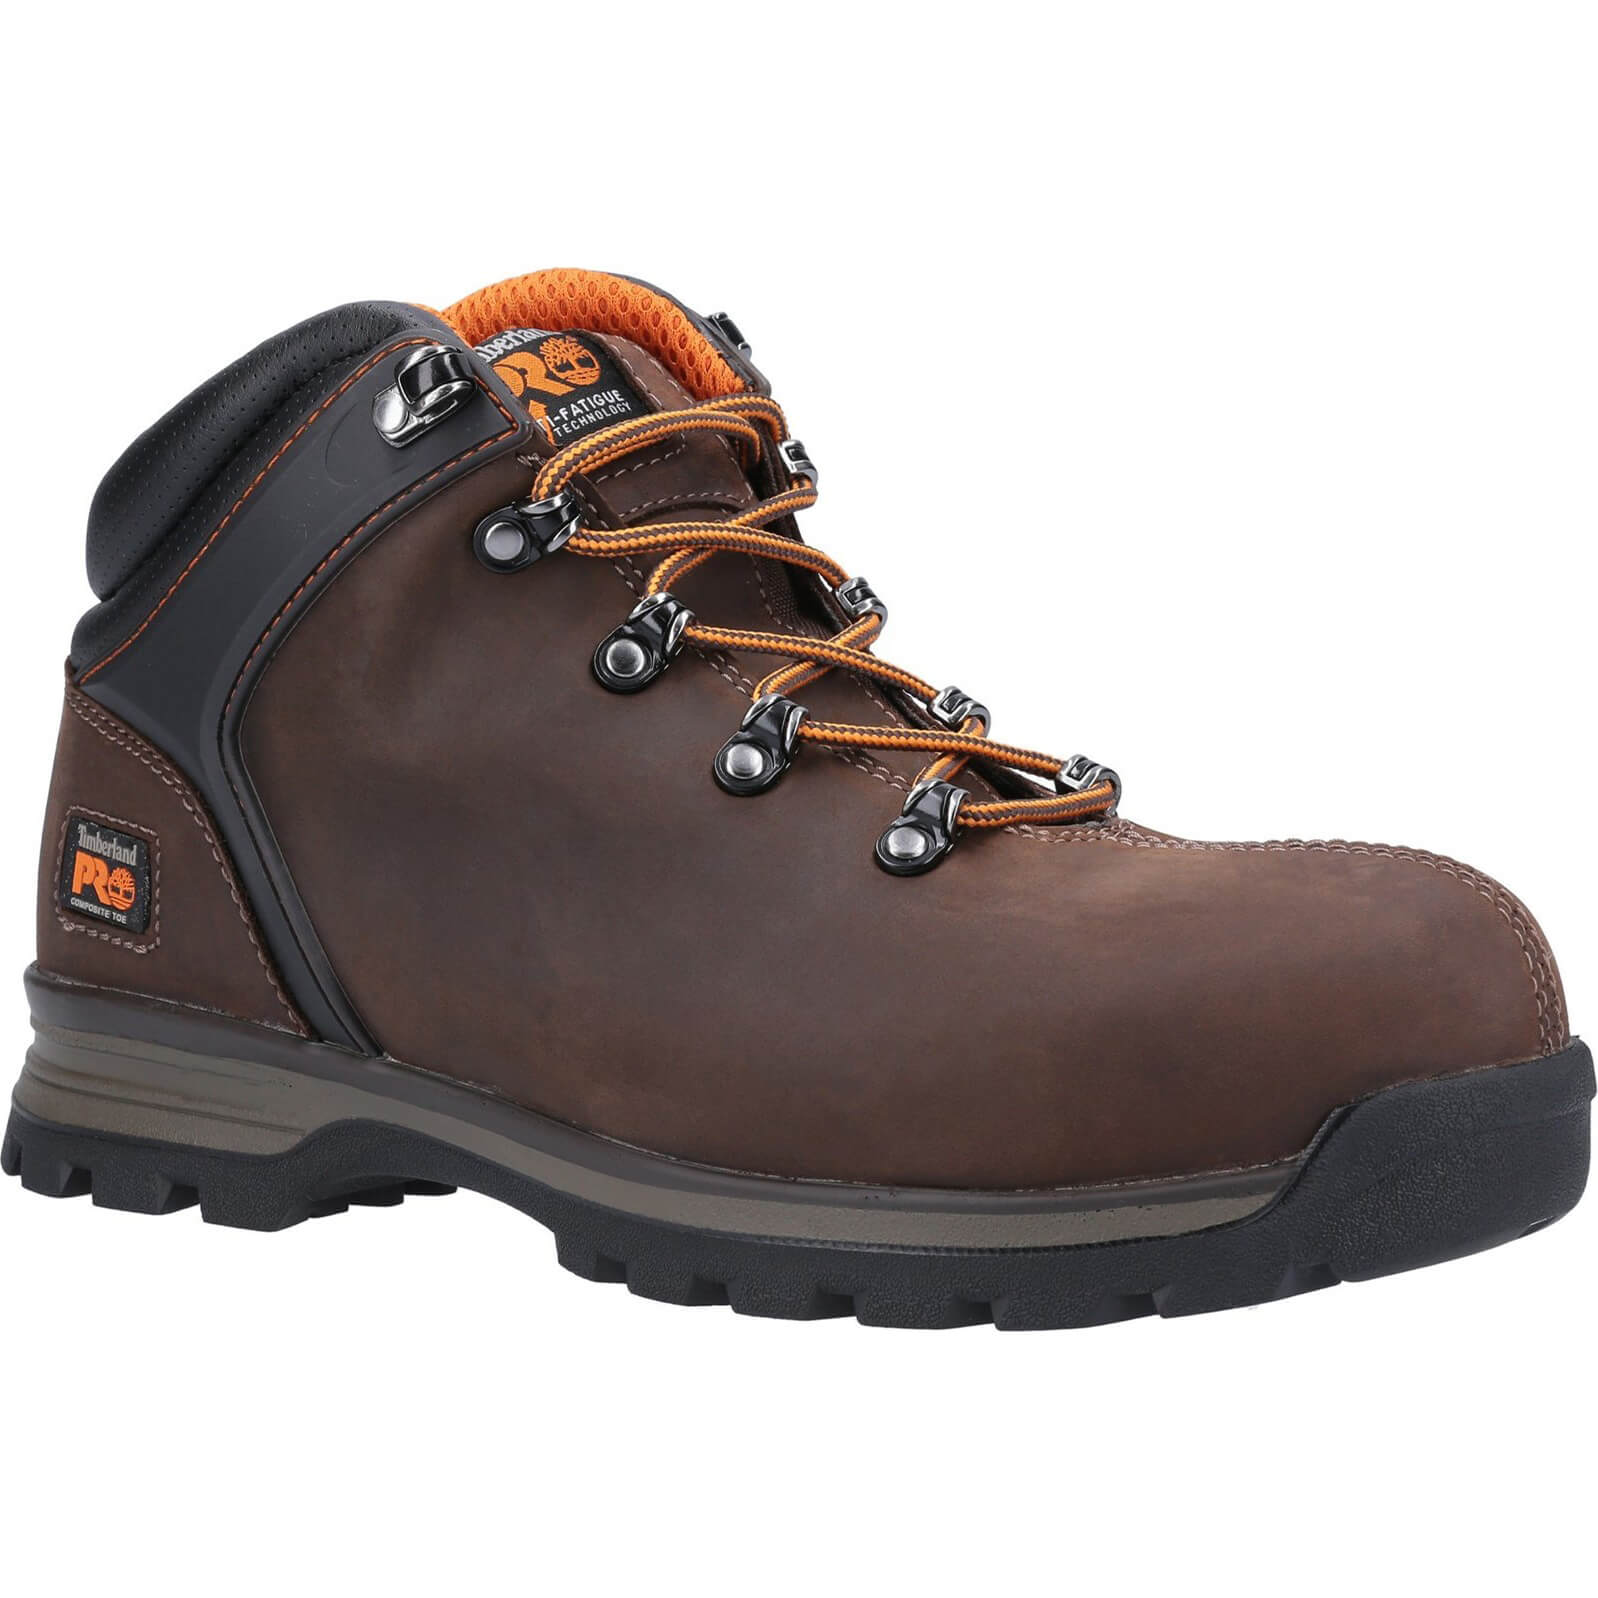 Image of Timberland Pro Splitrock XT Composite Safety Toe Work Boot Brown Size 10